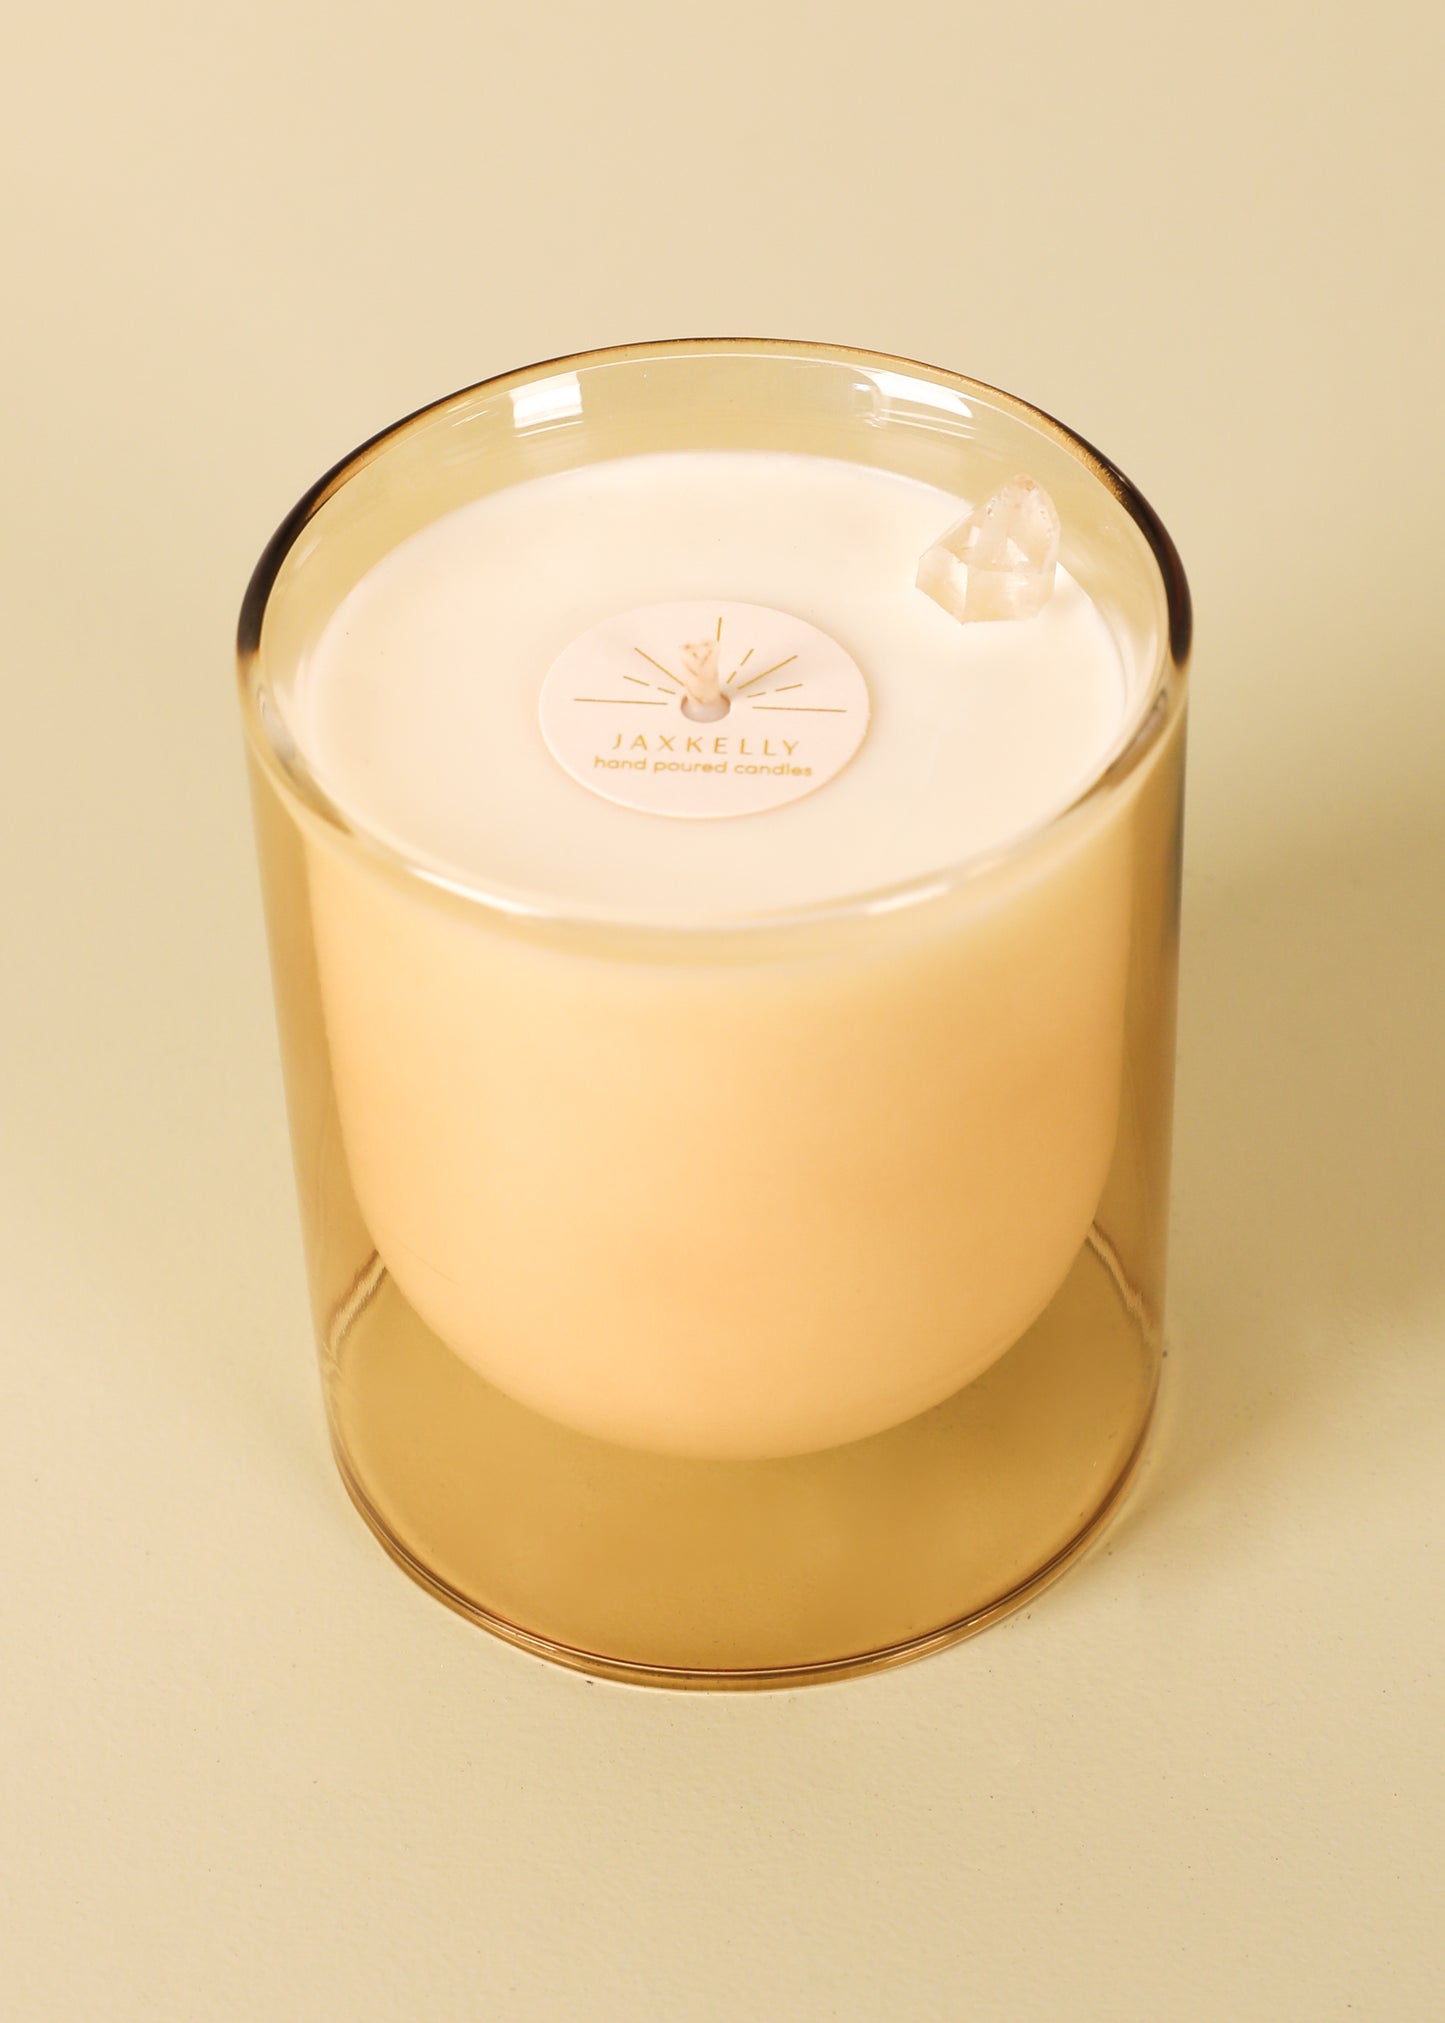 Daffodil Scooped Candle - Ambiance Collection